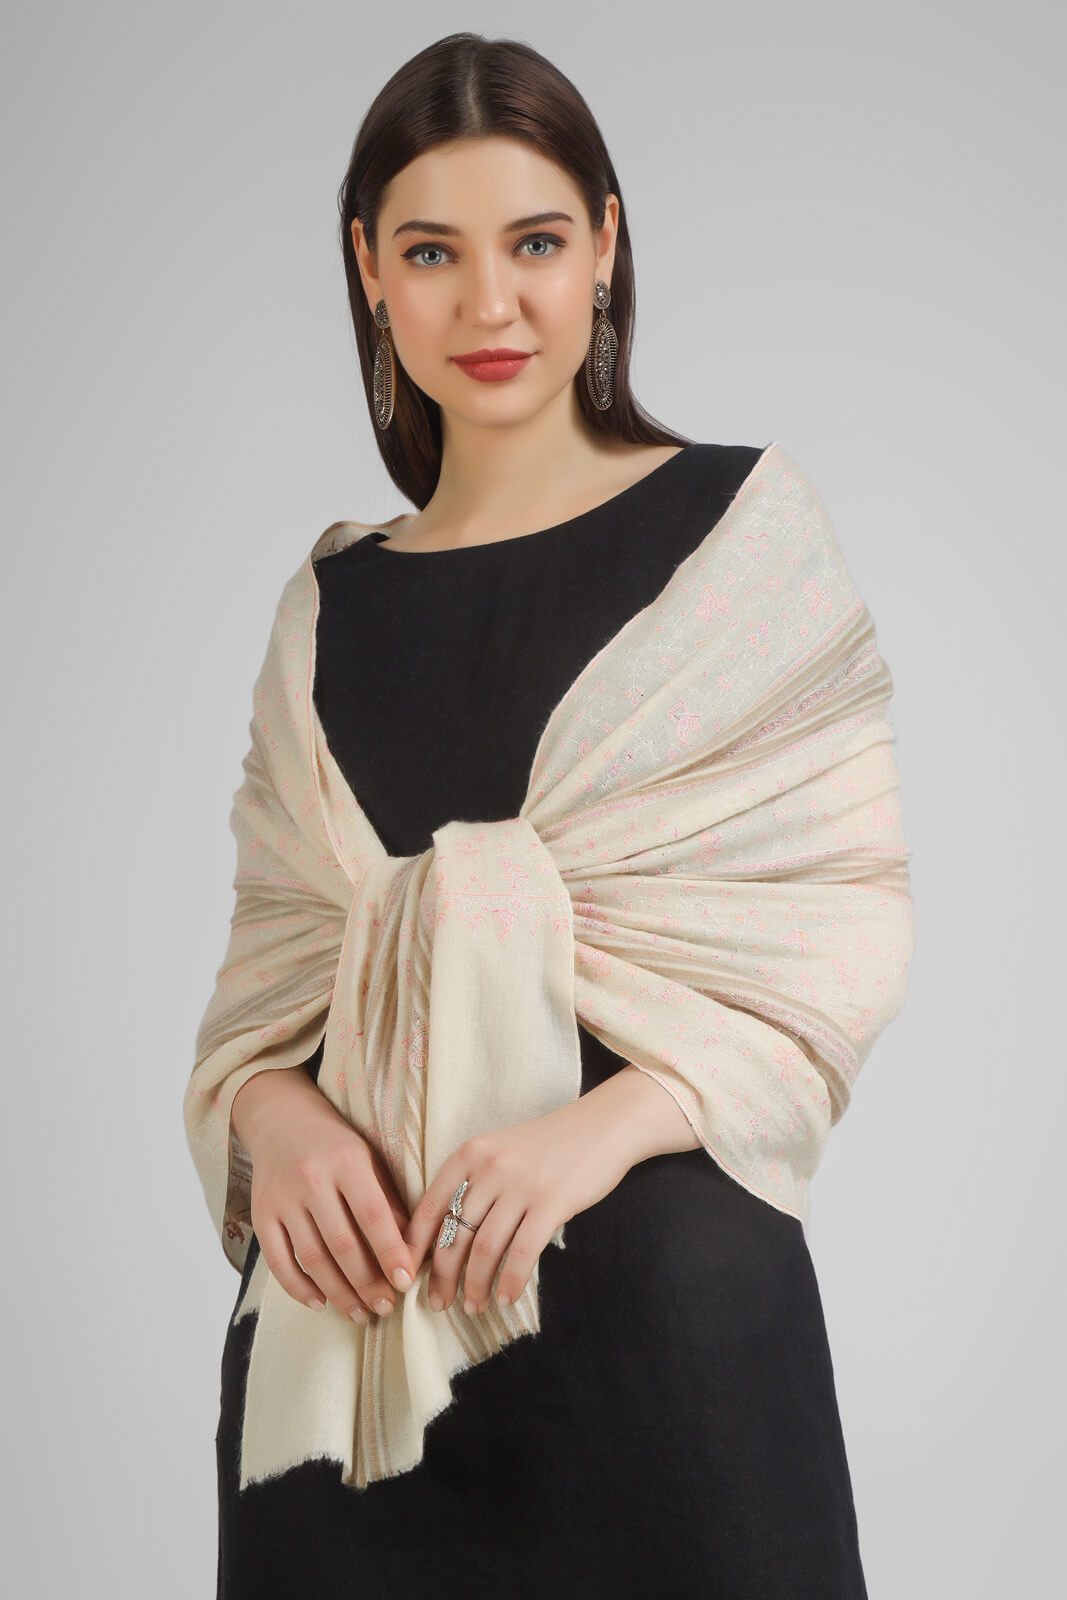 PASHMINA EMBROIDERY STOLE - We deliver exquisite products to your doorstep in the United States, China, Japan, Germany, United Kingdom, France, Canada, and Paris.